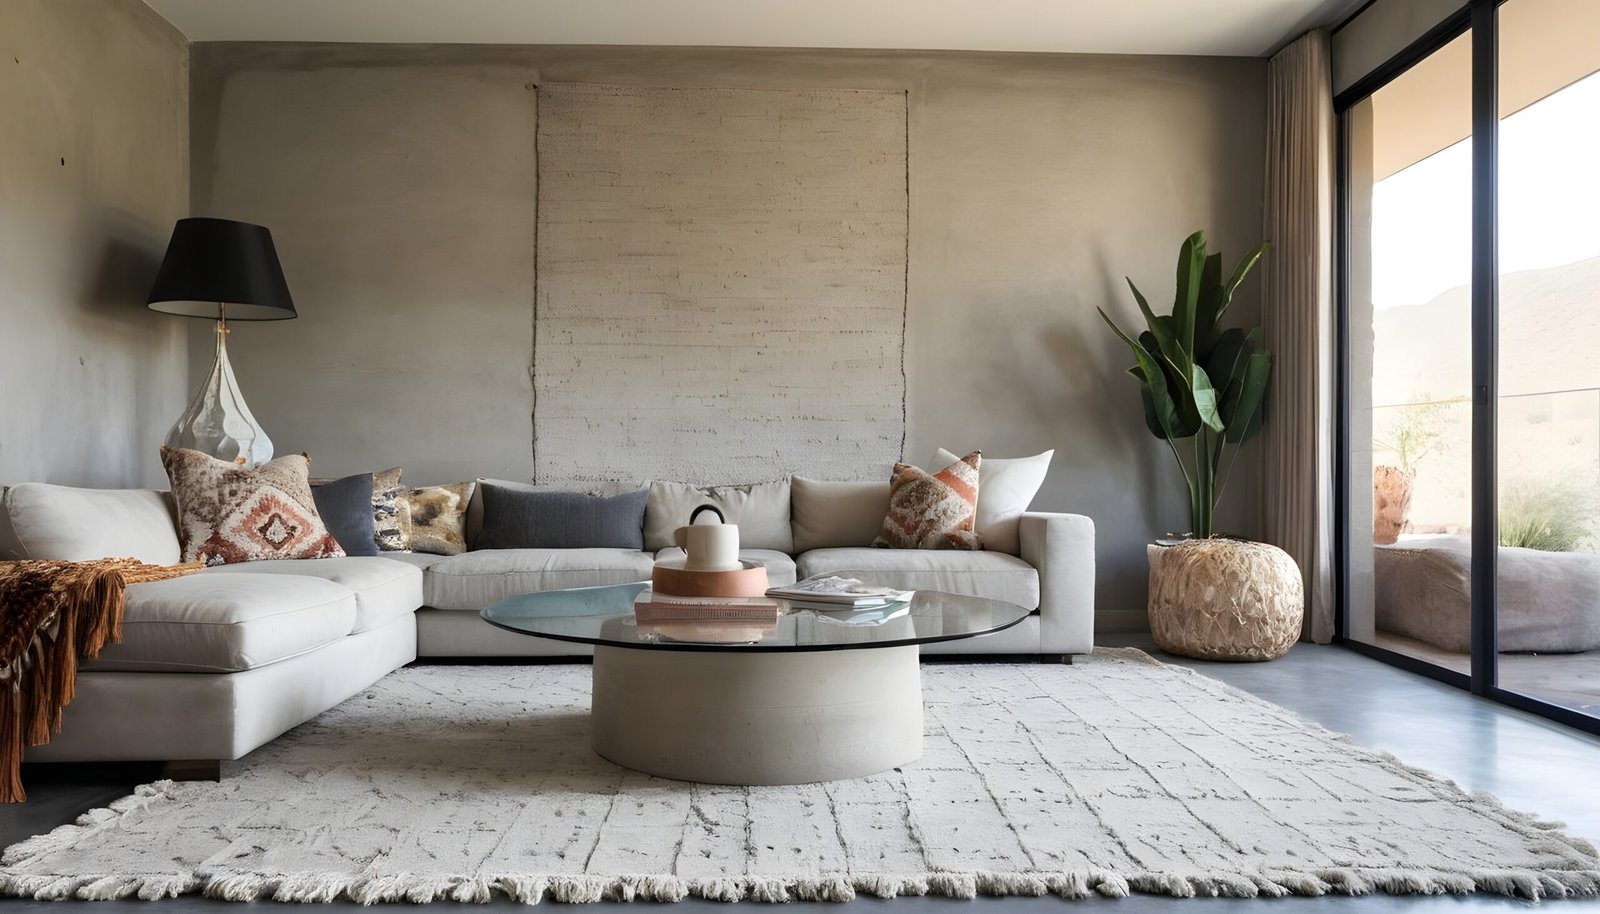 Living room with concrete walls and textured rug.